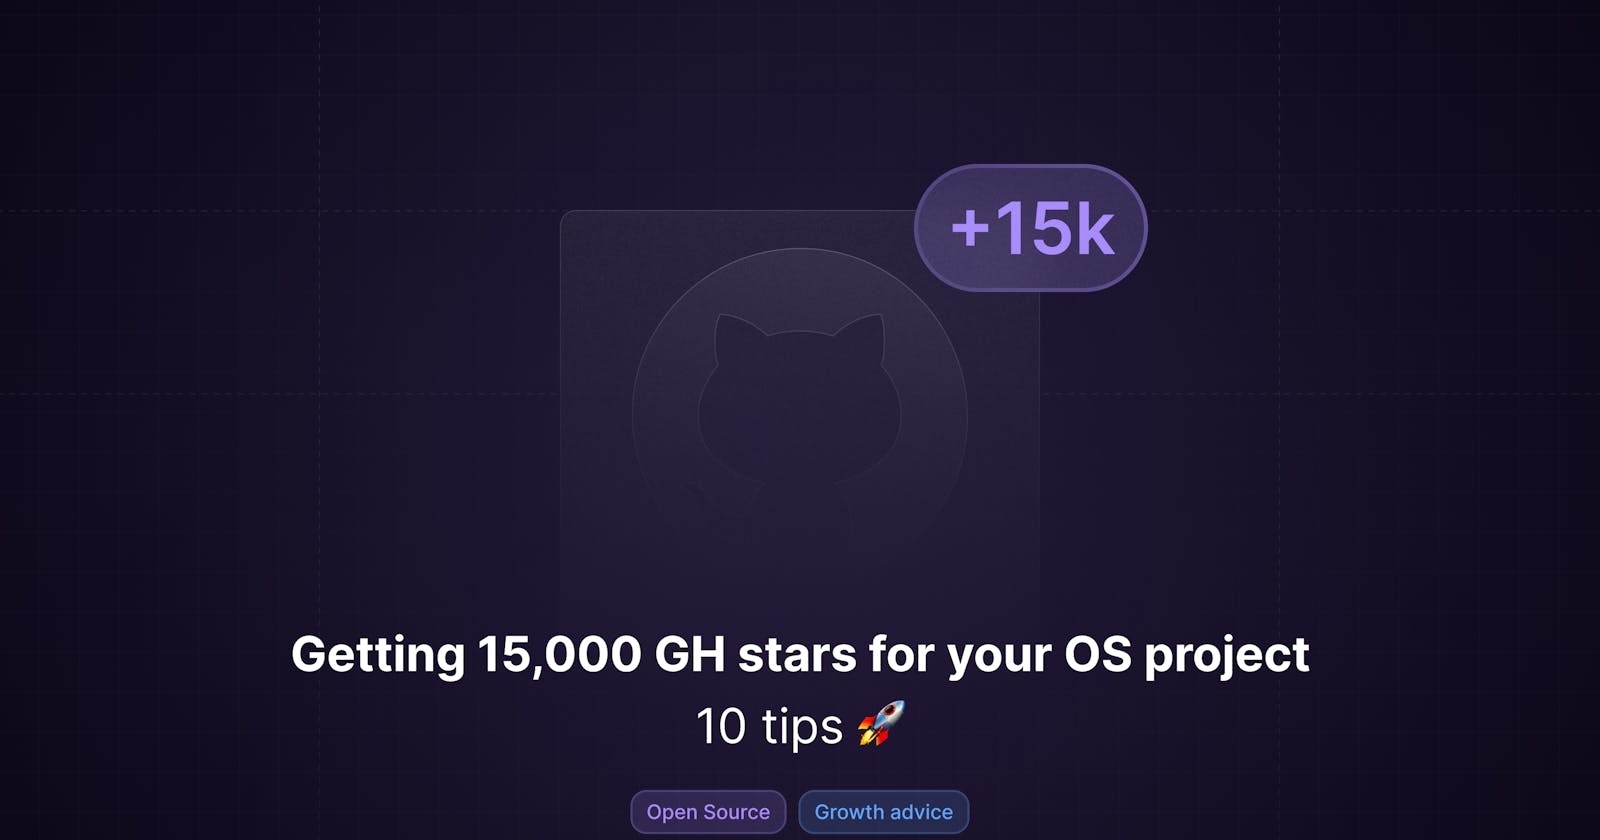 10 tips: Getting 15,000 GH stars for your OS project  🚀